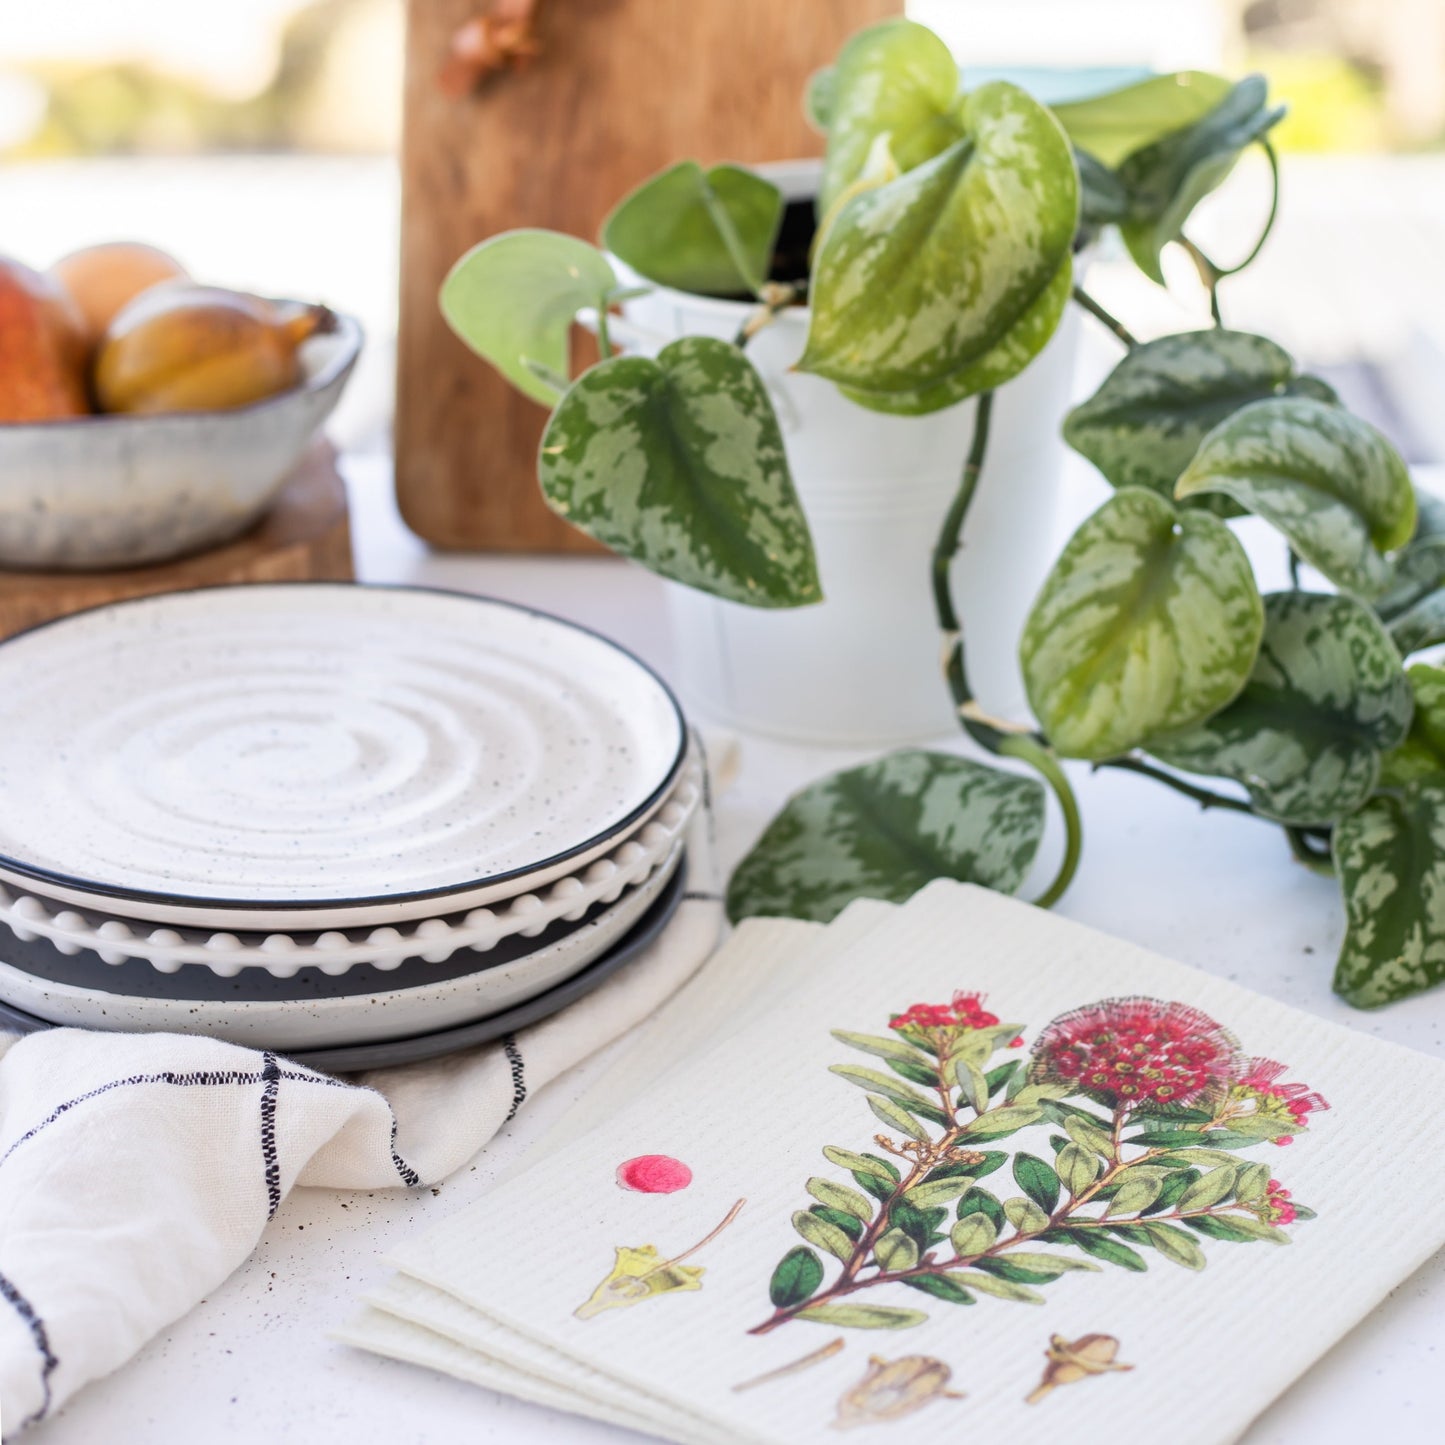 Set of 3 swedish dishcloths in New Zealand botanical prints on a table with plates, plants and a bowl of fruit.